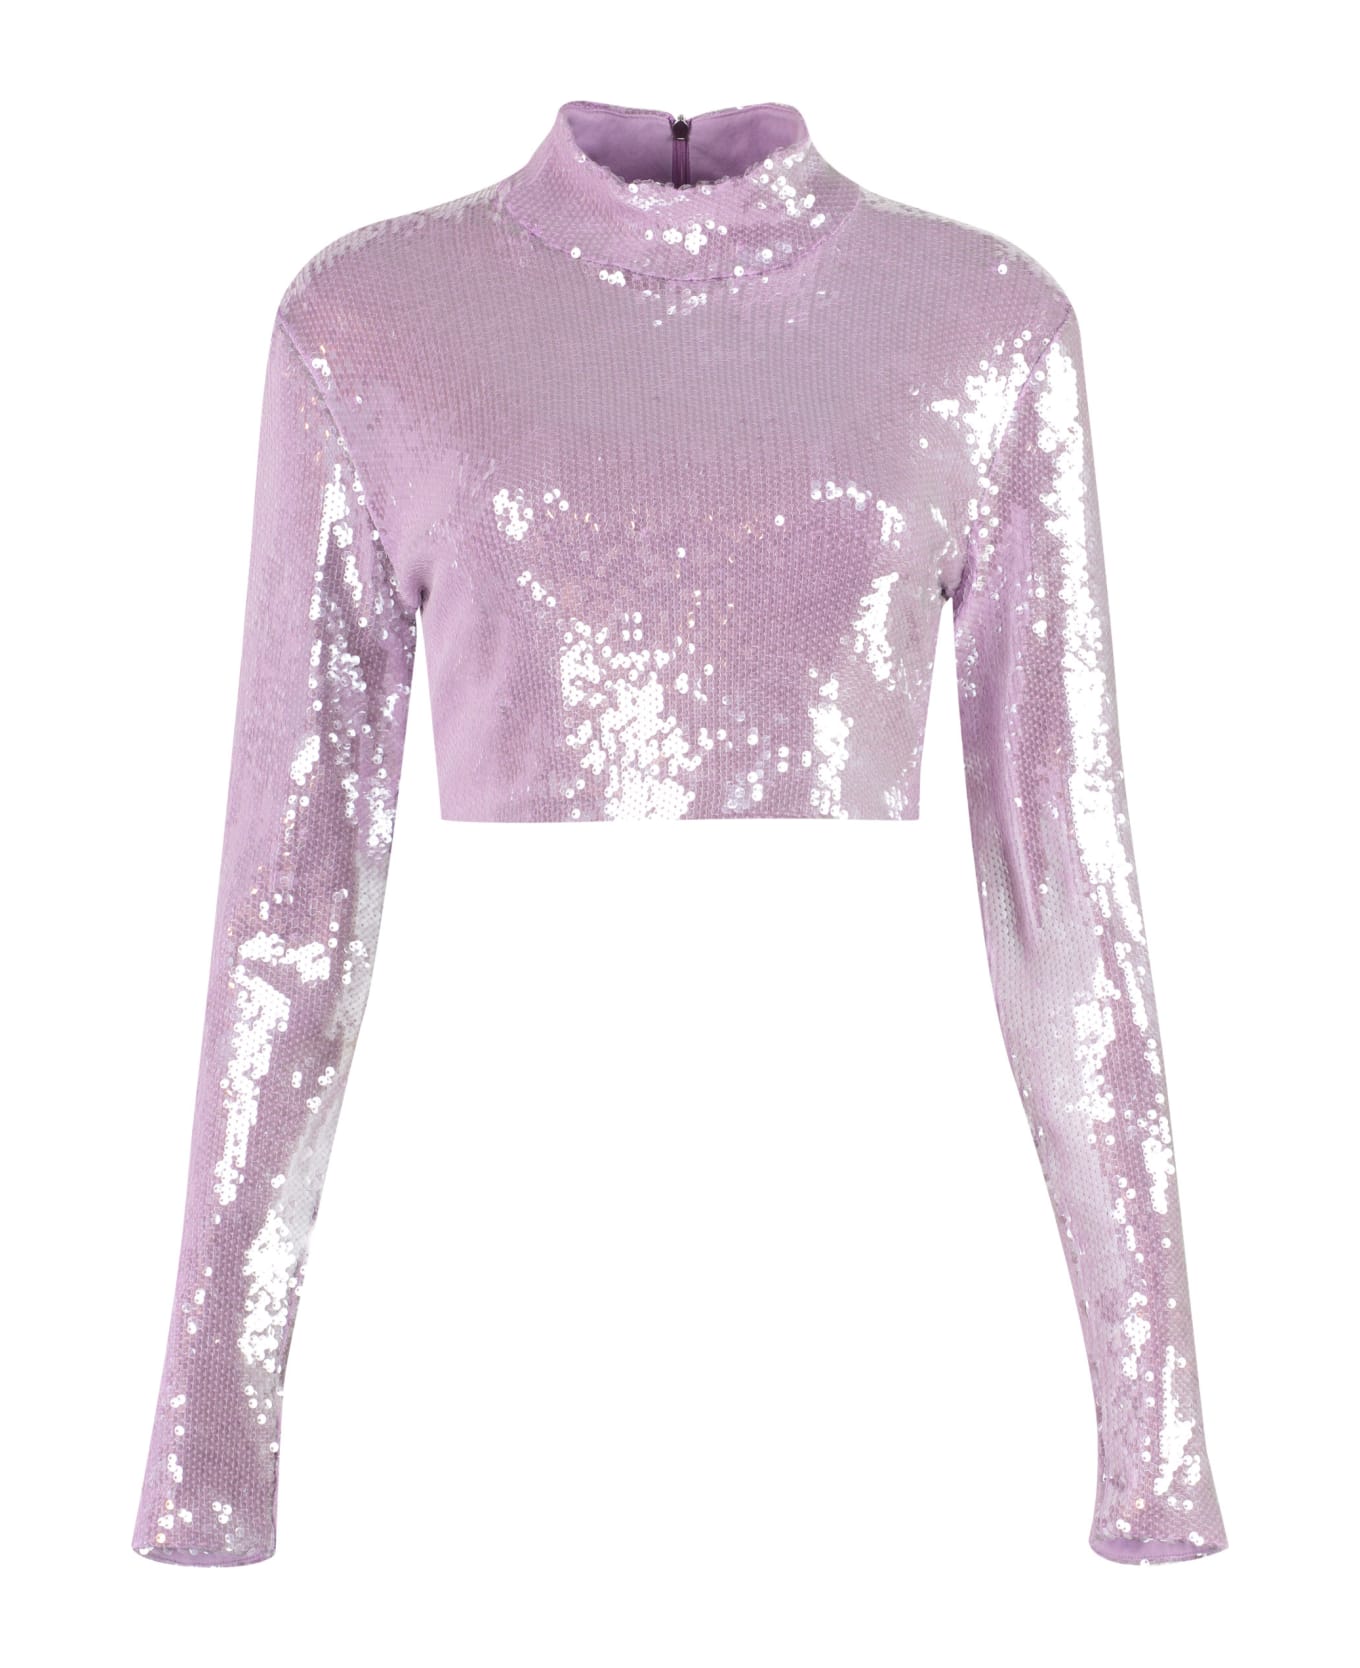 Rotate by Birger Christensen Long Sleeve Sequin Top - Lilac Tシャツ